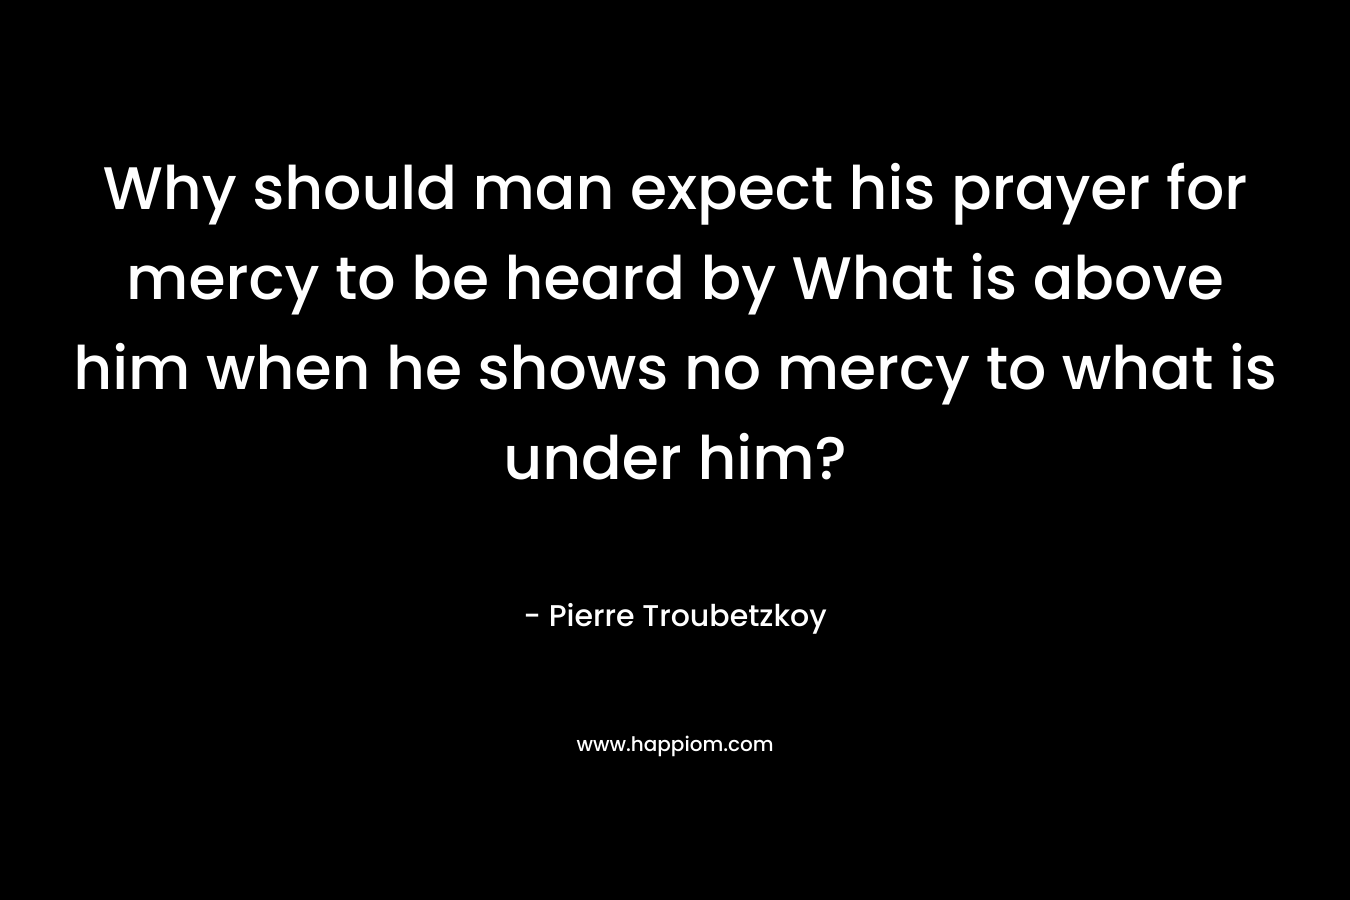 Why should man expect his prayer for mercy to be heard by What is above him when he shows no mercy to what is under him?